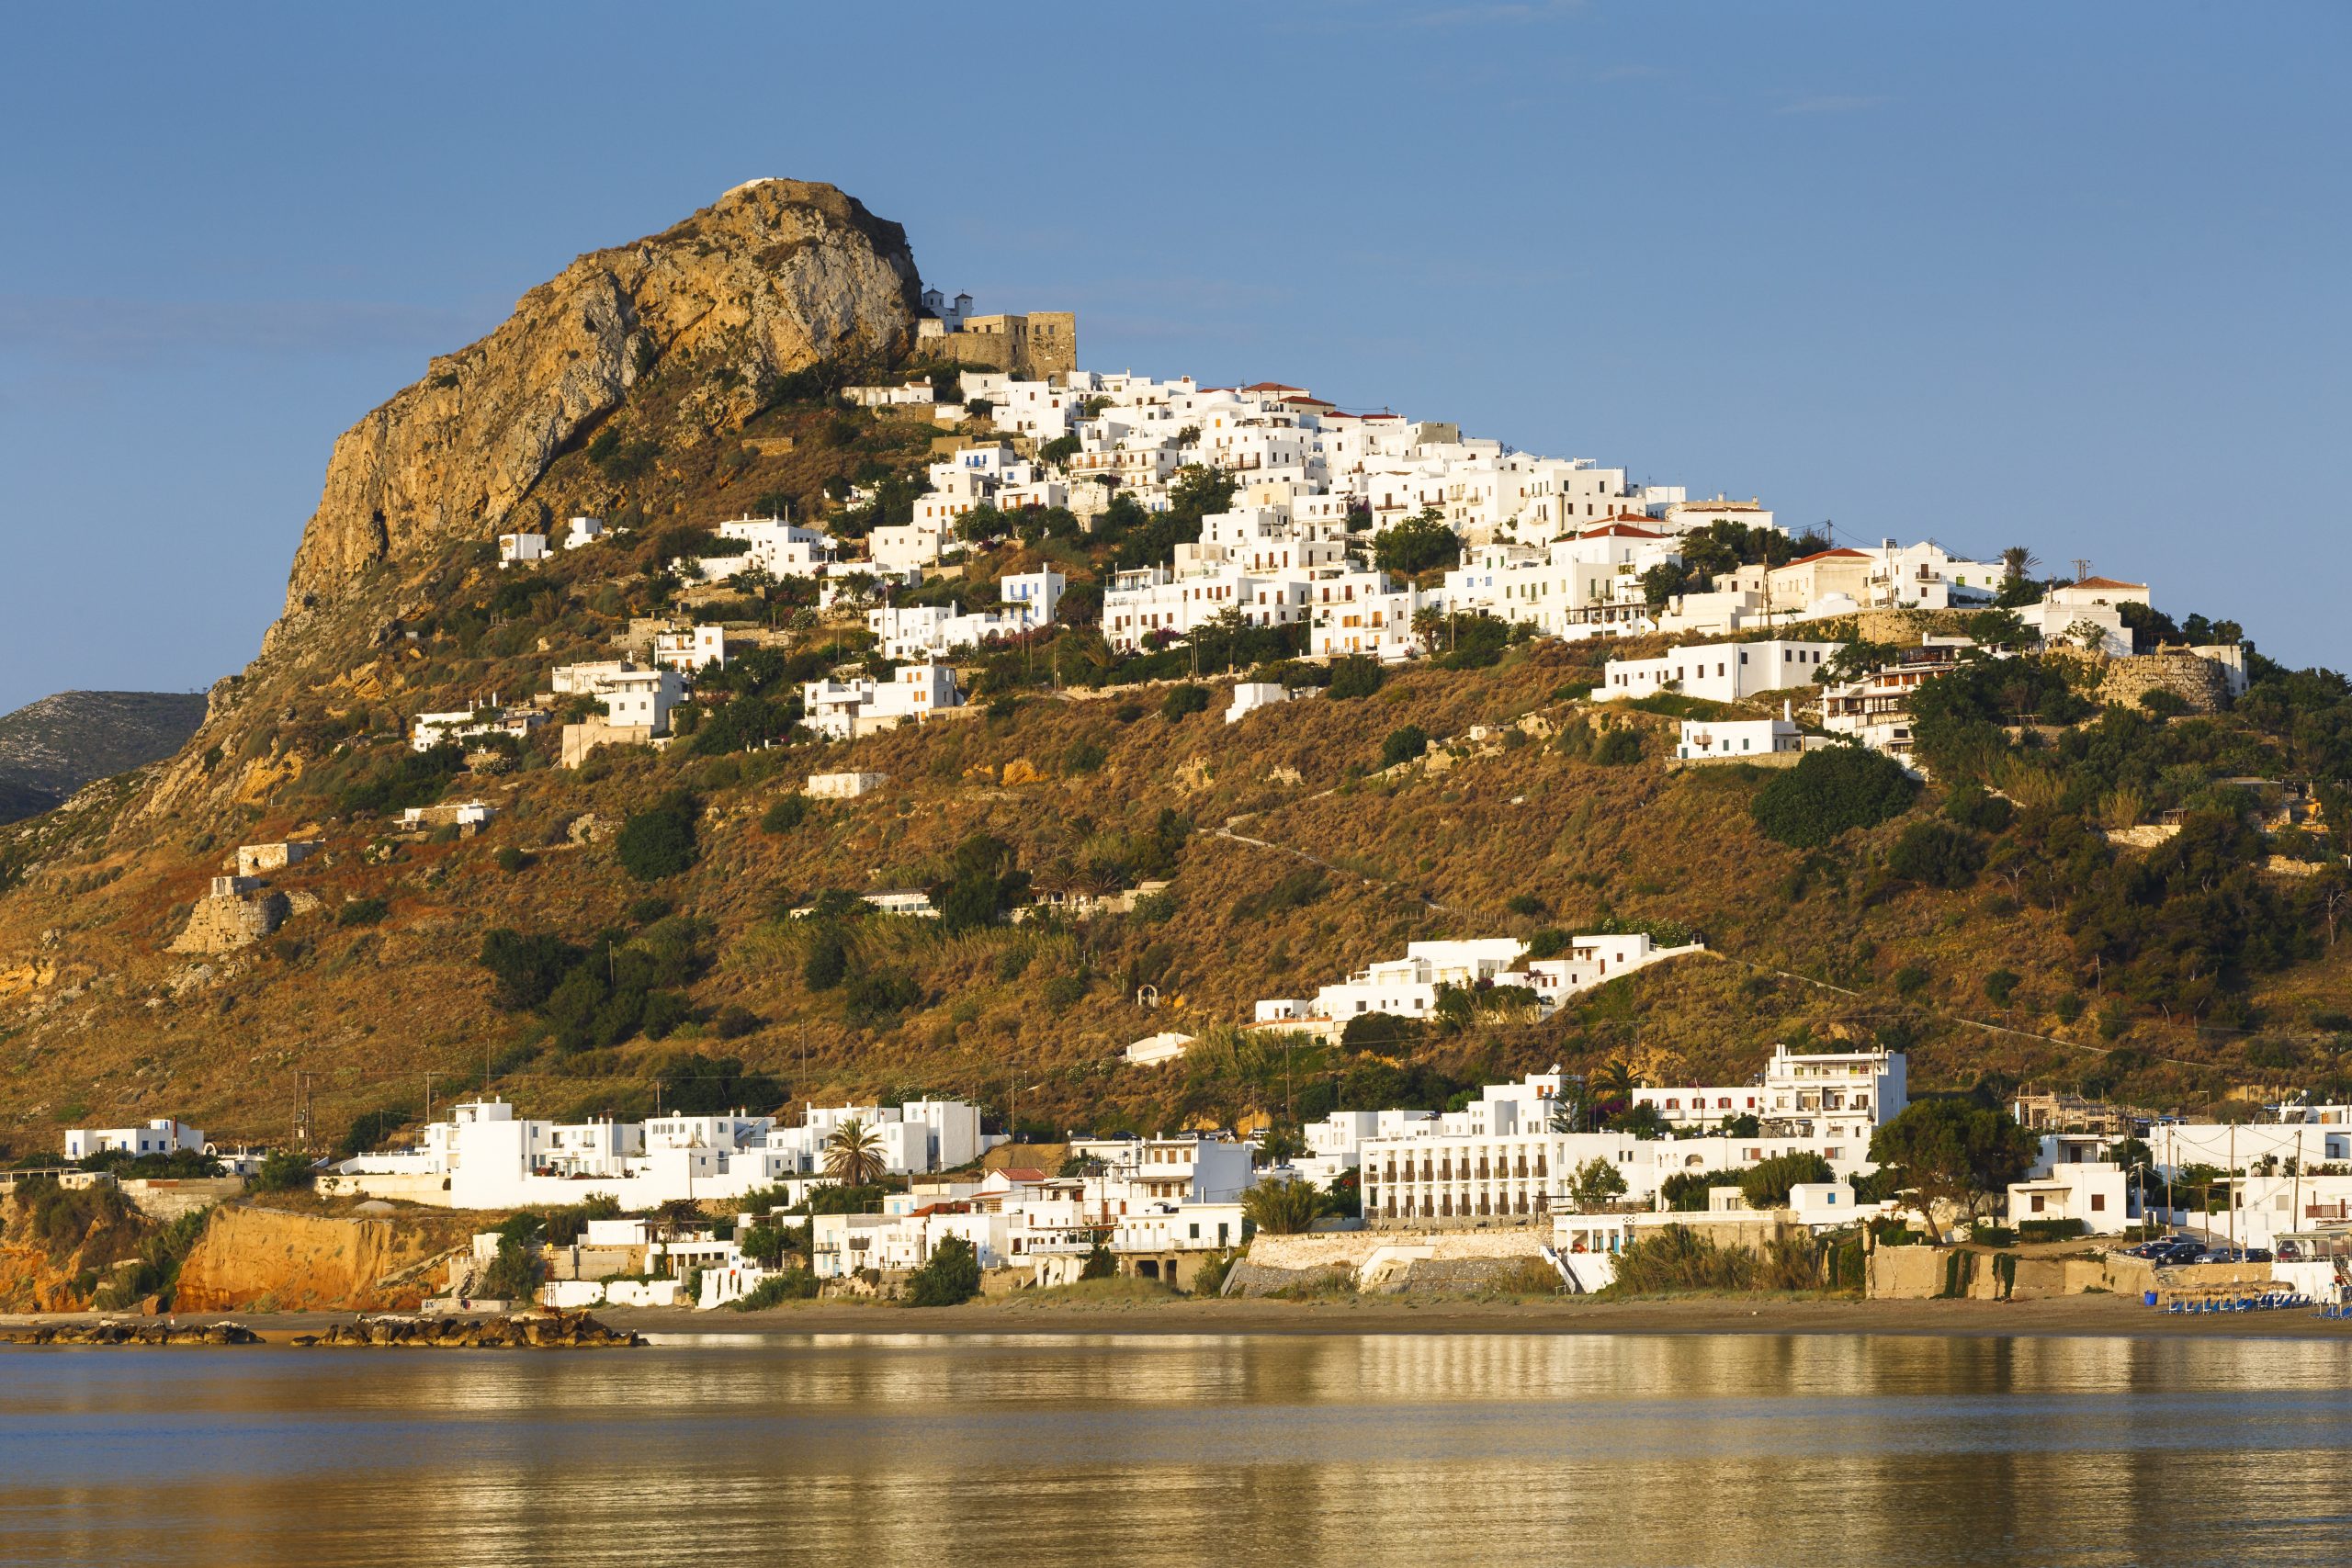 Skyros: The most popular destination for visitors from Northern Greece